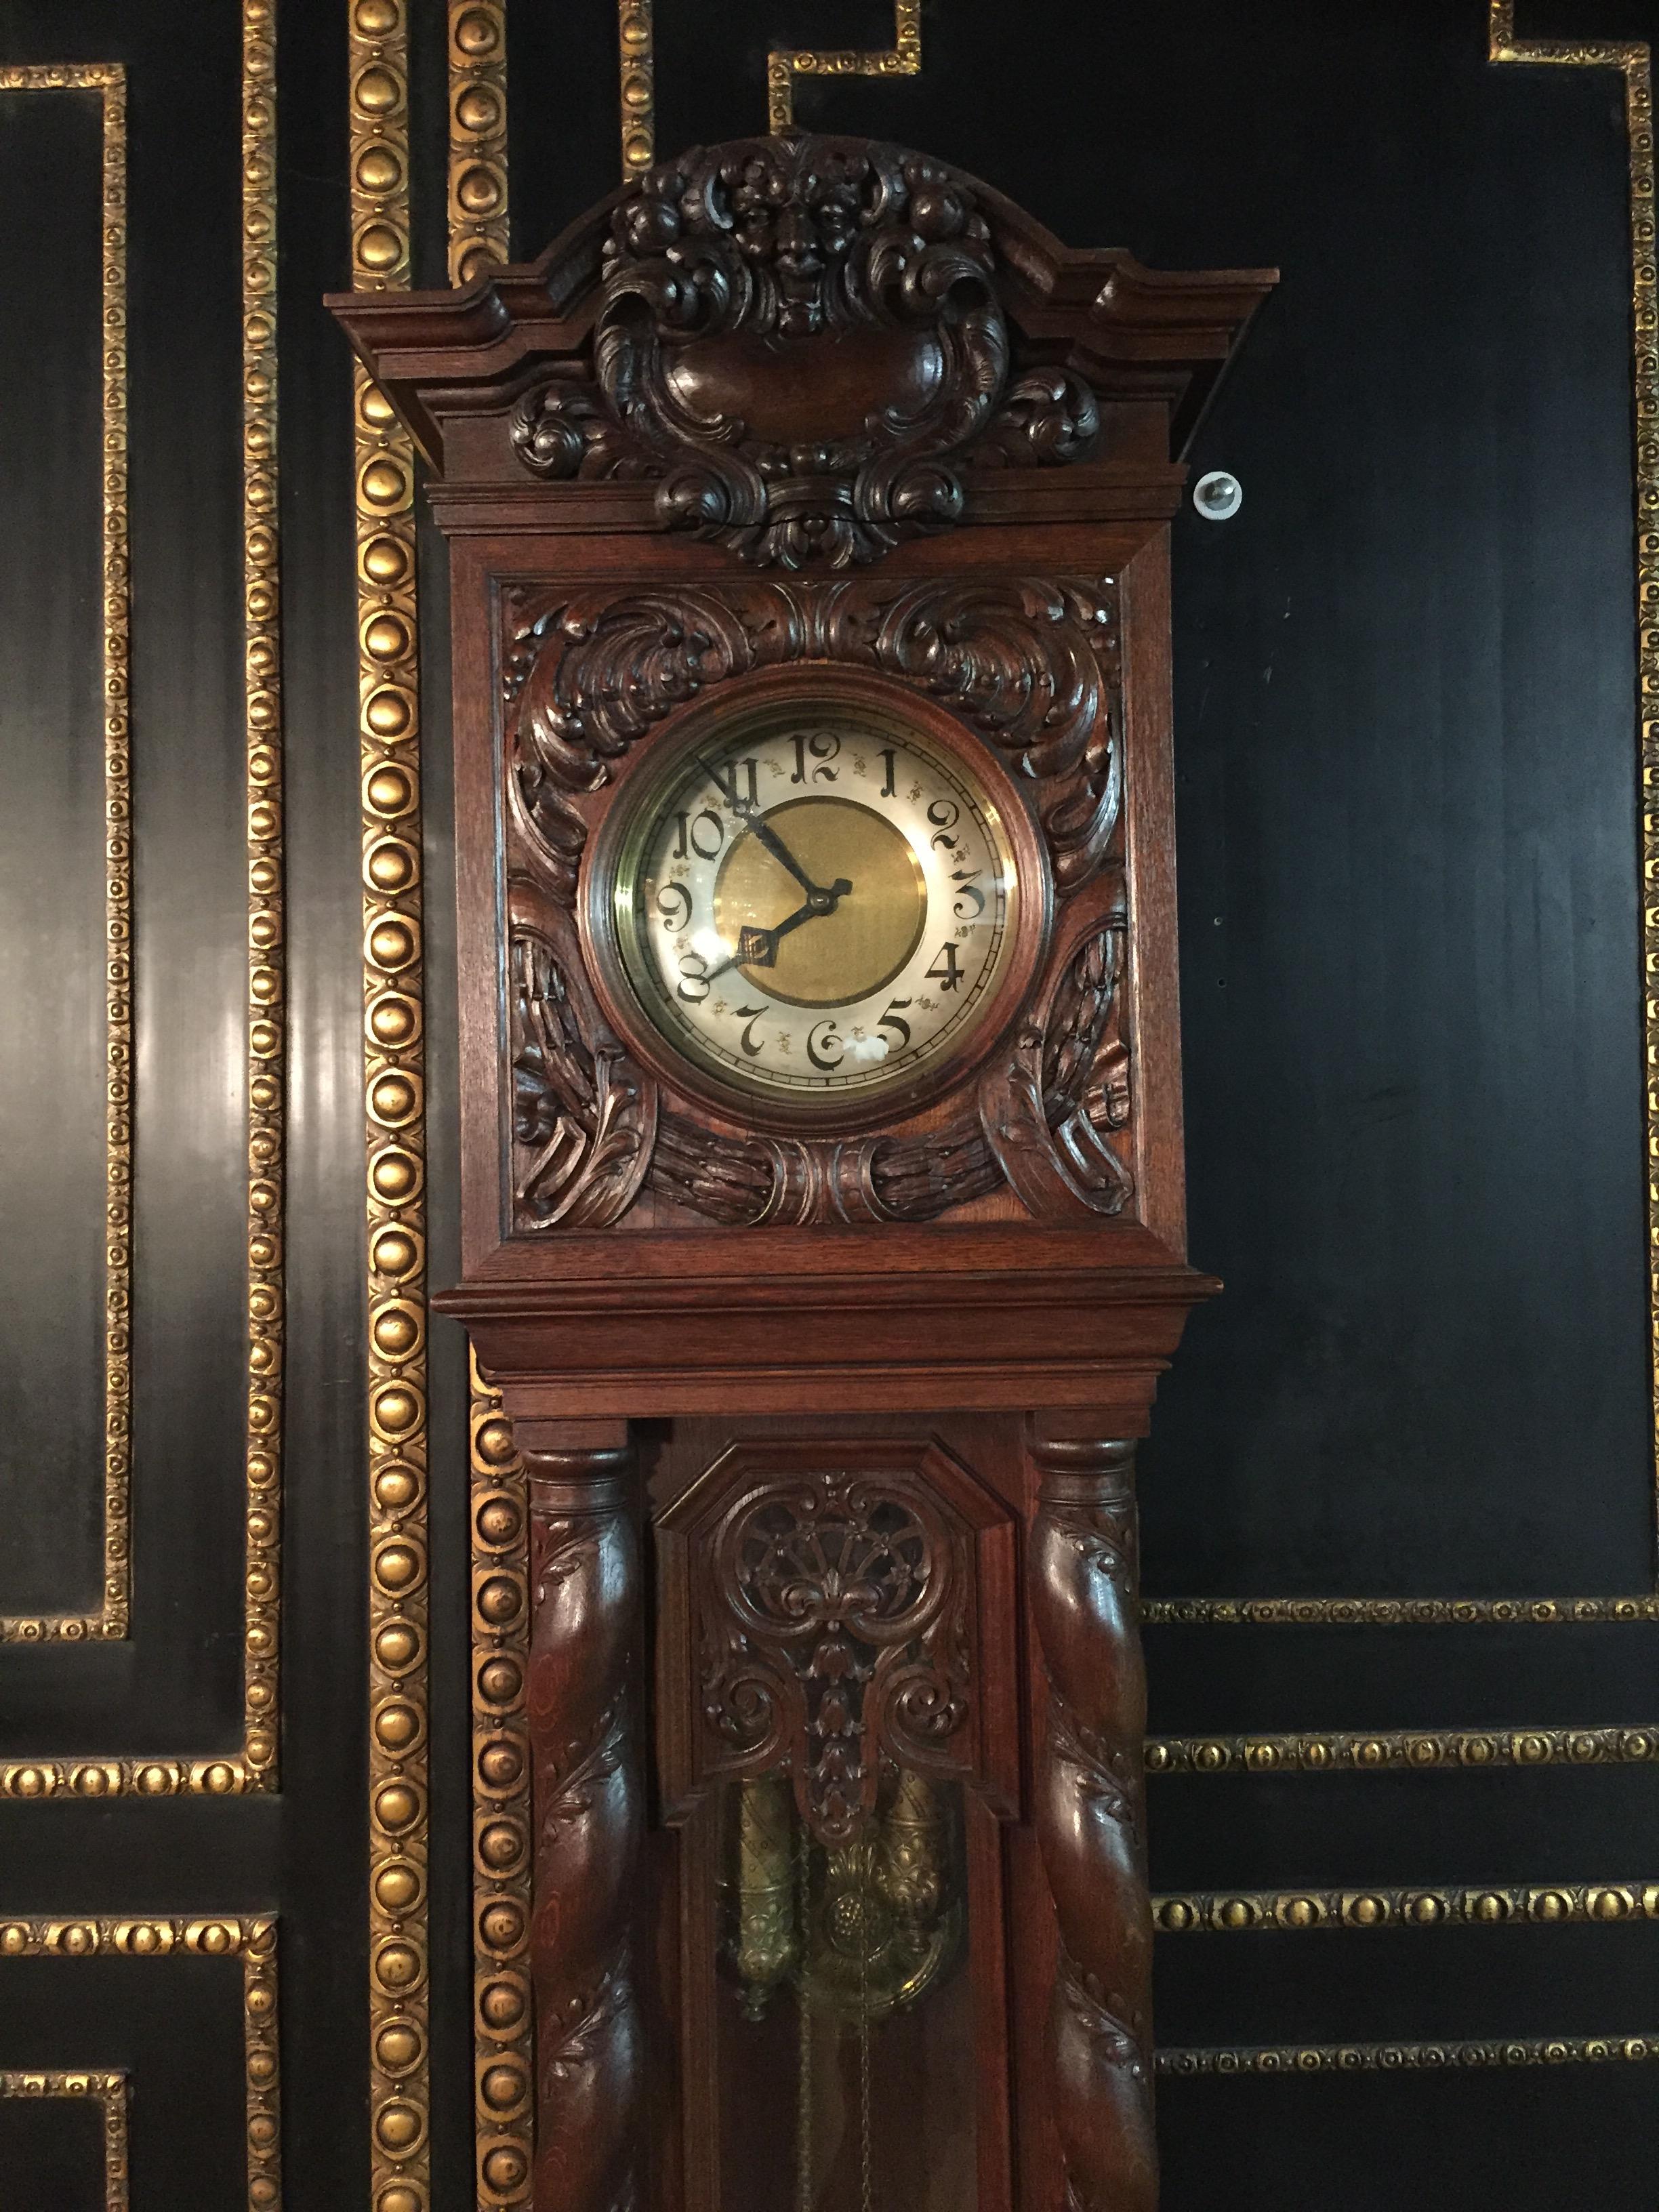 Hand-Carved Neo Renaissance Grandfather Clock, circa 1870 with 2 Columns